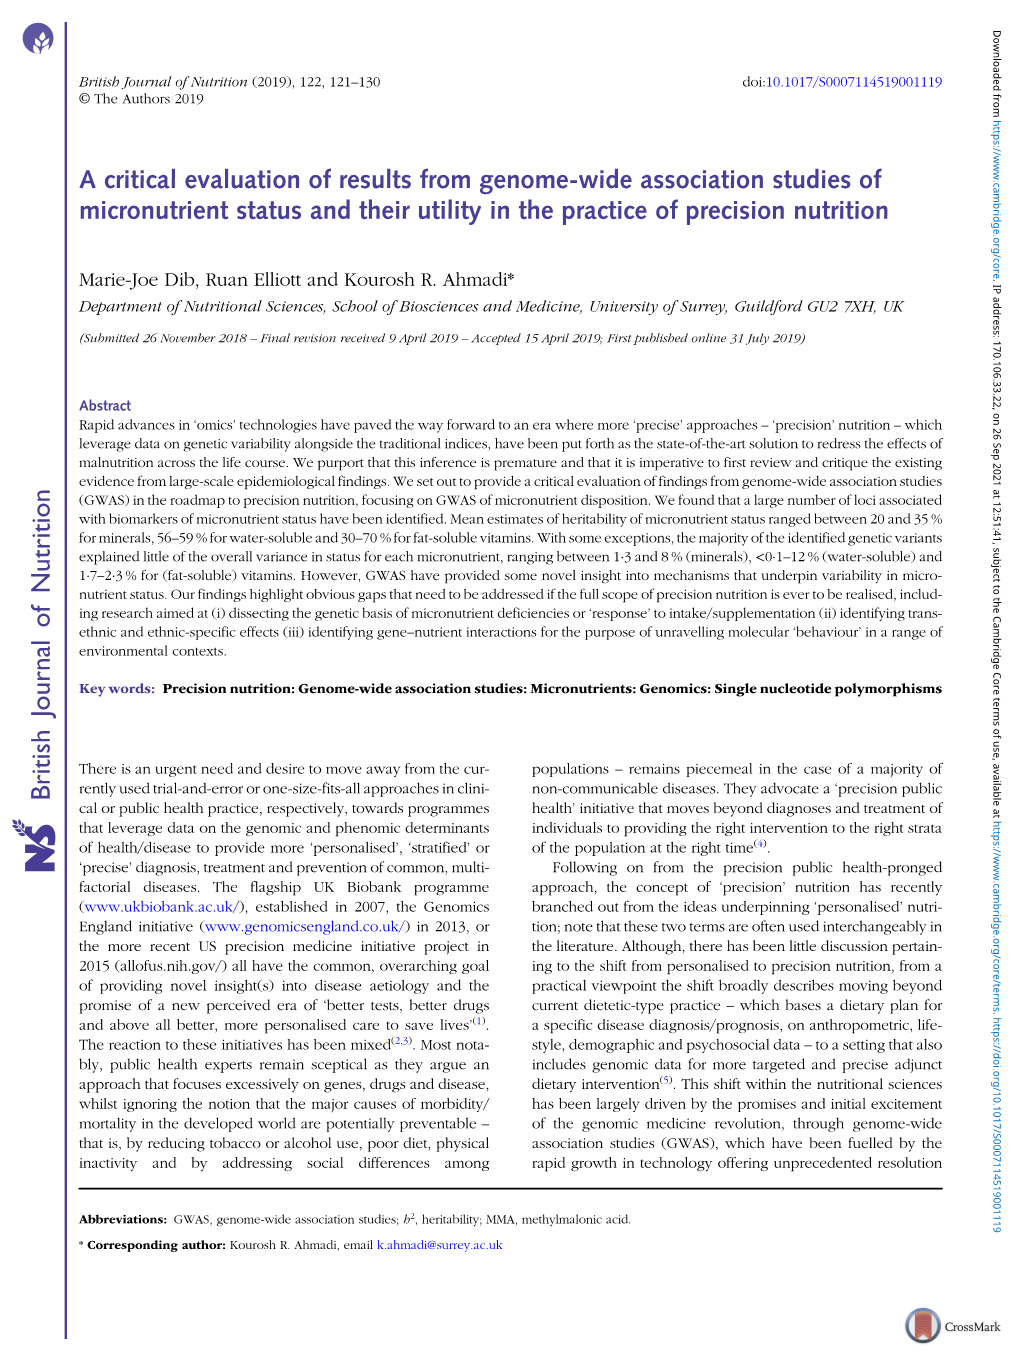 A Critical Evaluation of Results from Genome-Wide Association Studies of Micronutrient Status and Their Utility in the Practice of Precision Nutrition